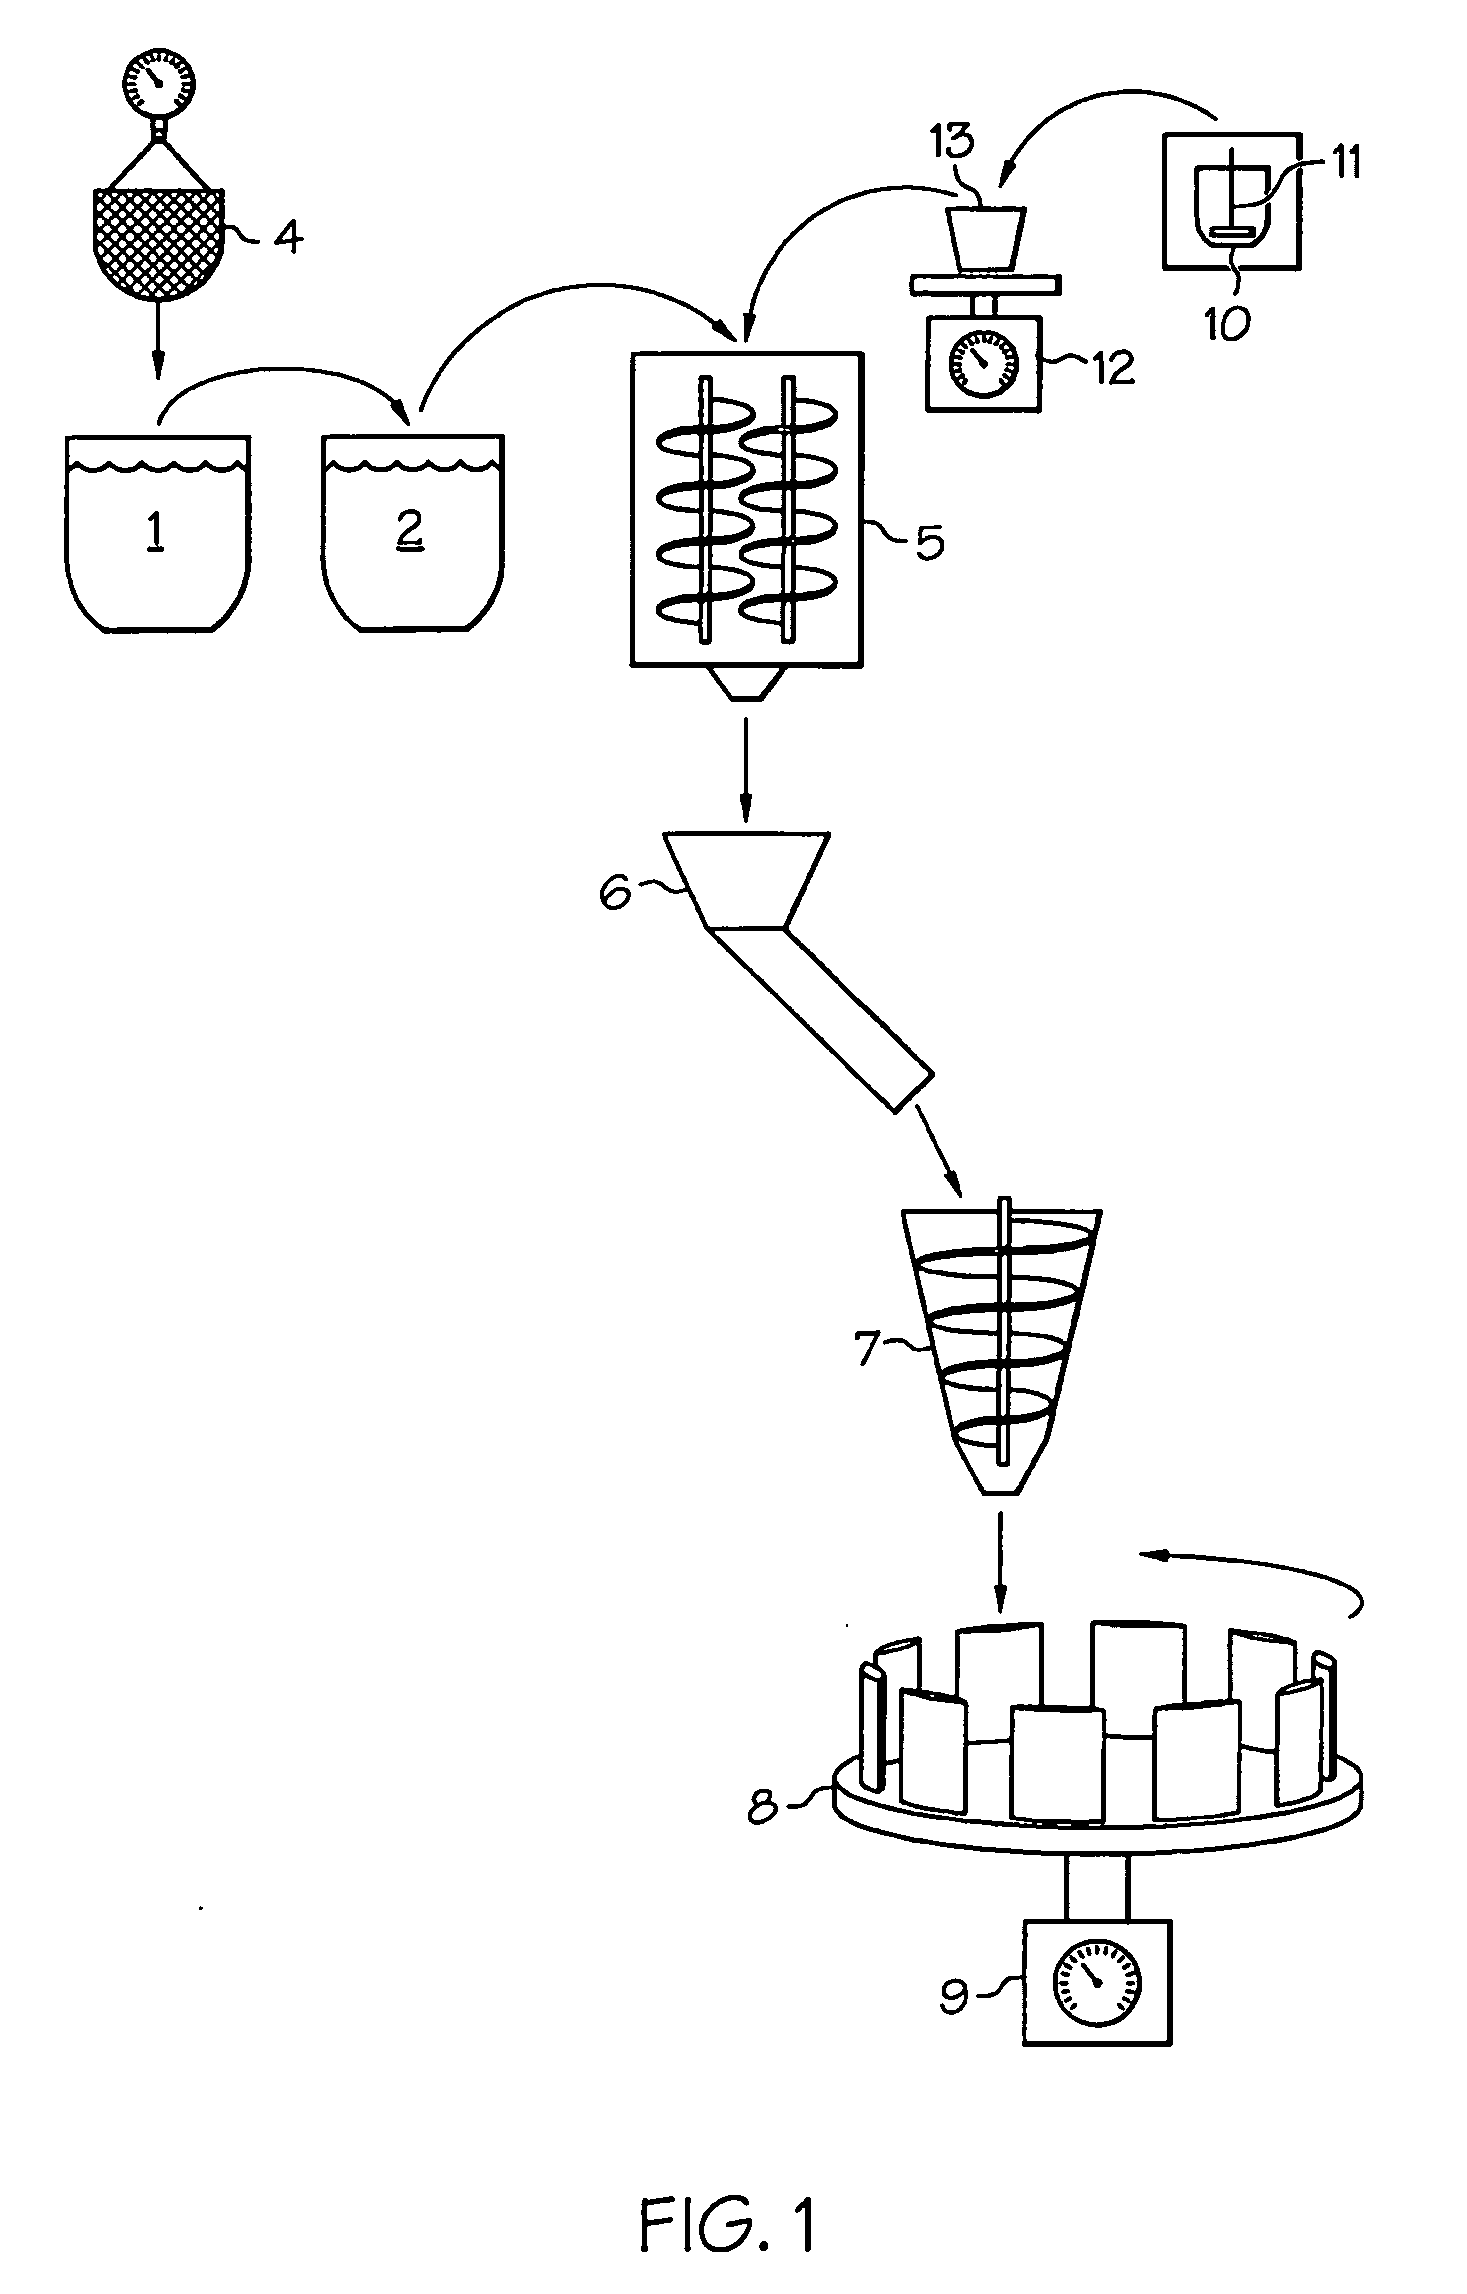 Batch rice production system and improved microwavable, commercially sterile, shelf-stable rice product